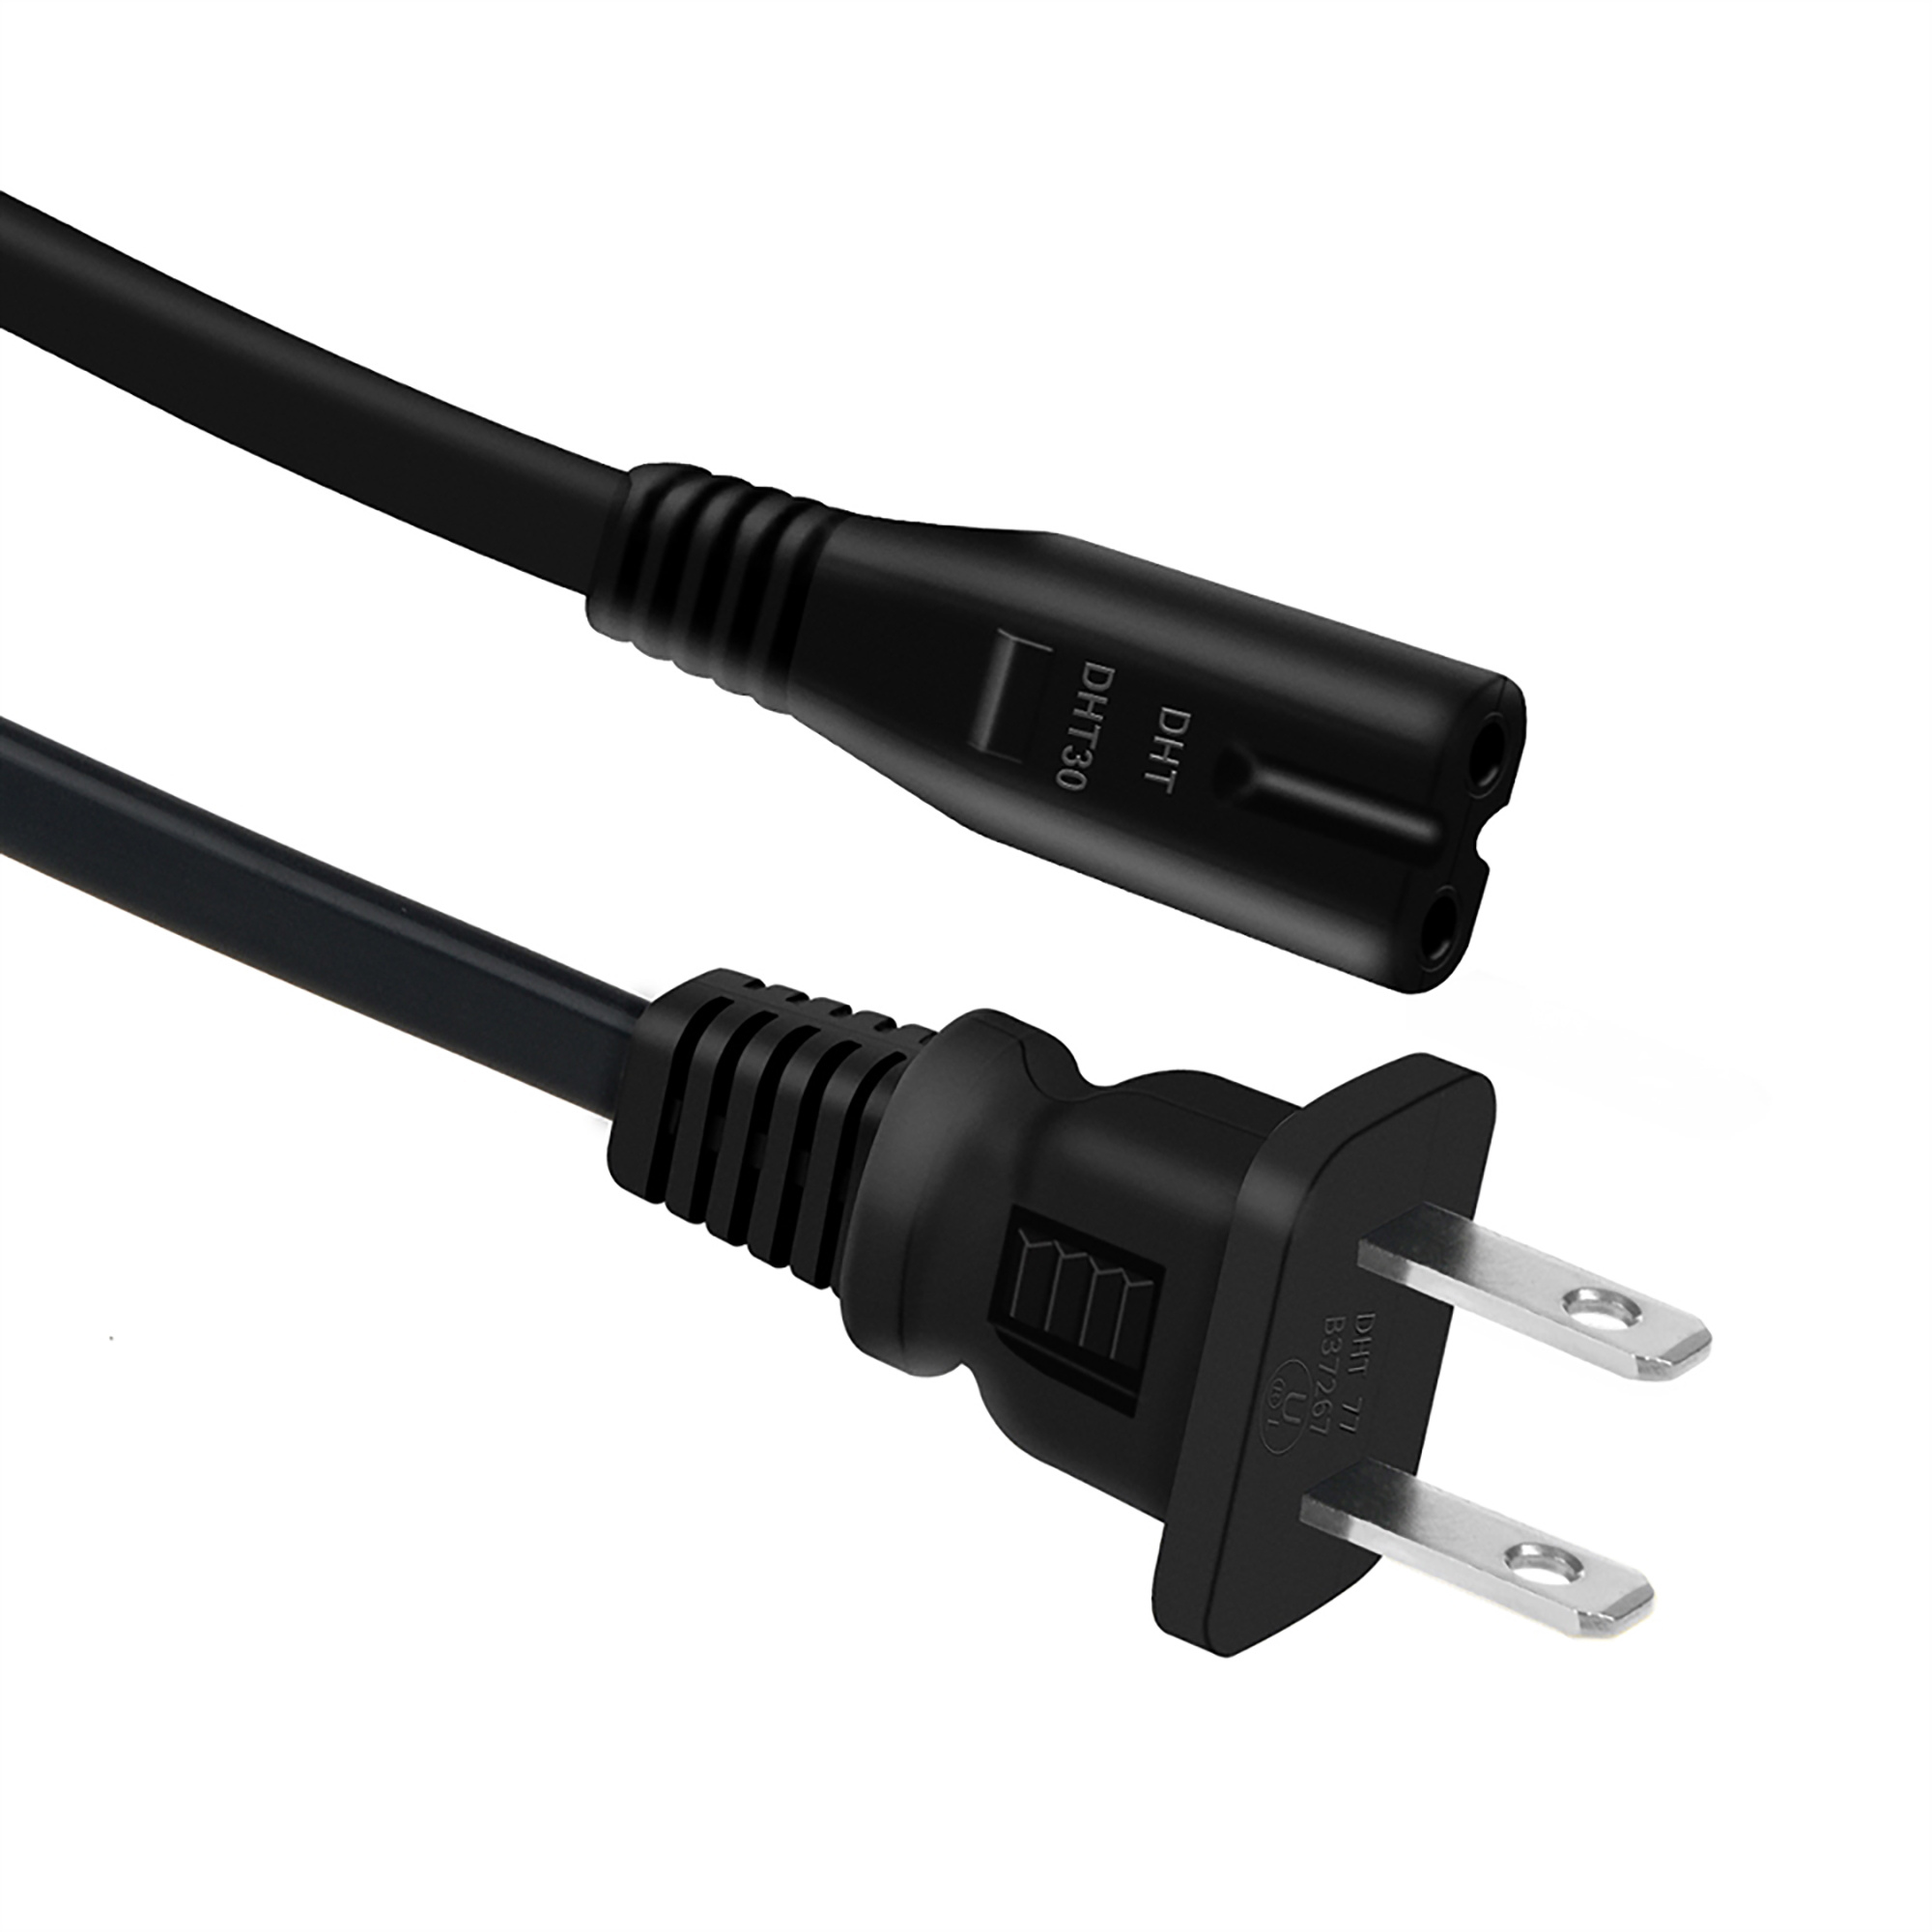 PKPOWER 5ft UL AC Power Cord for Klipsch BAR 40 2.1 Sound Bar with Wireless Subwoofer - image 3 of 3